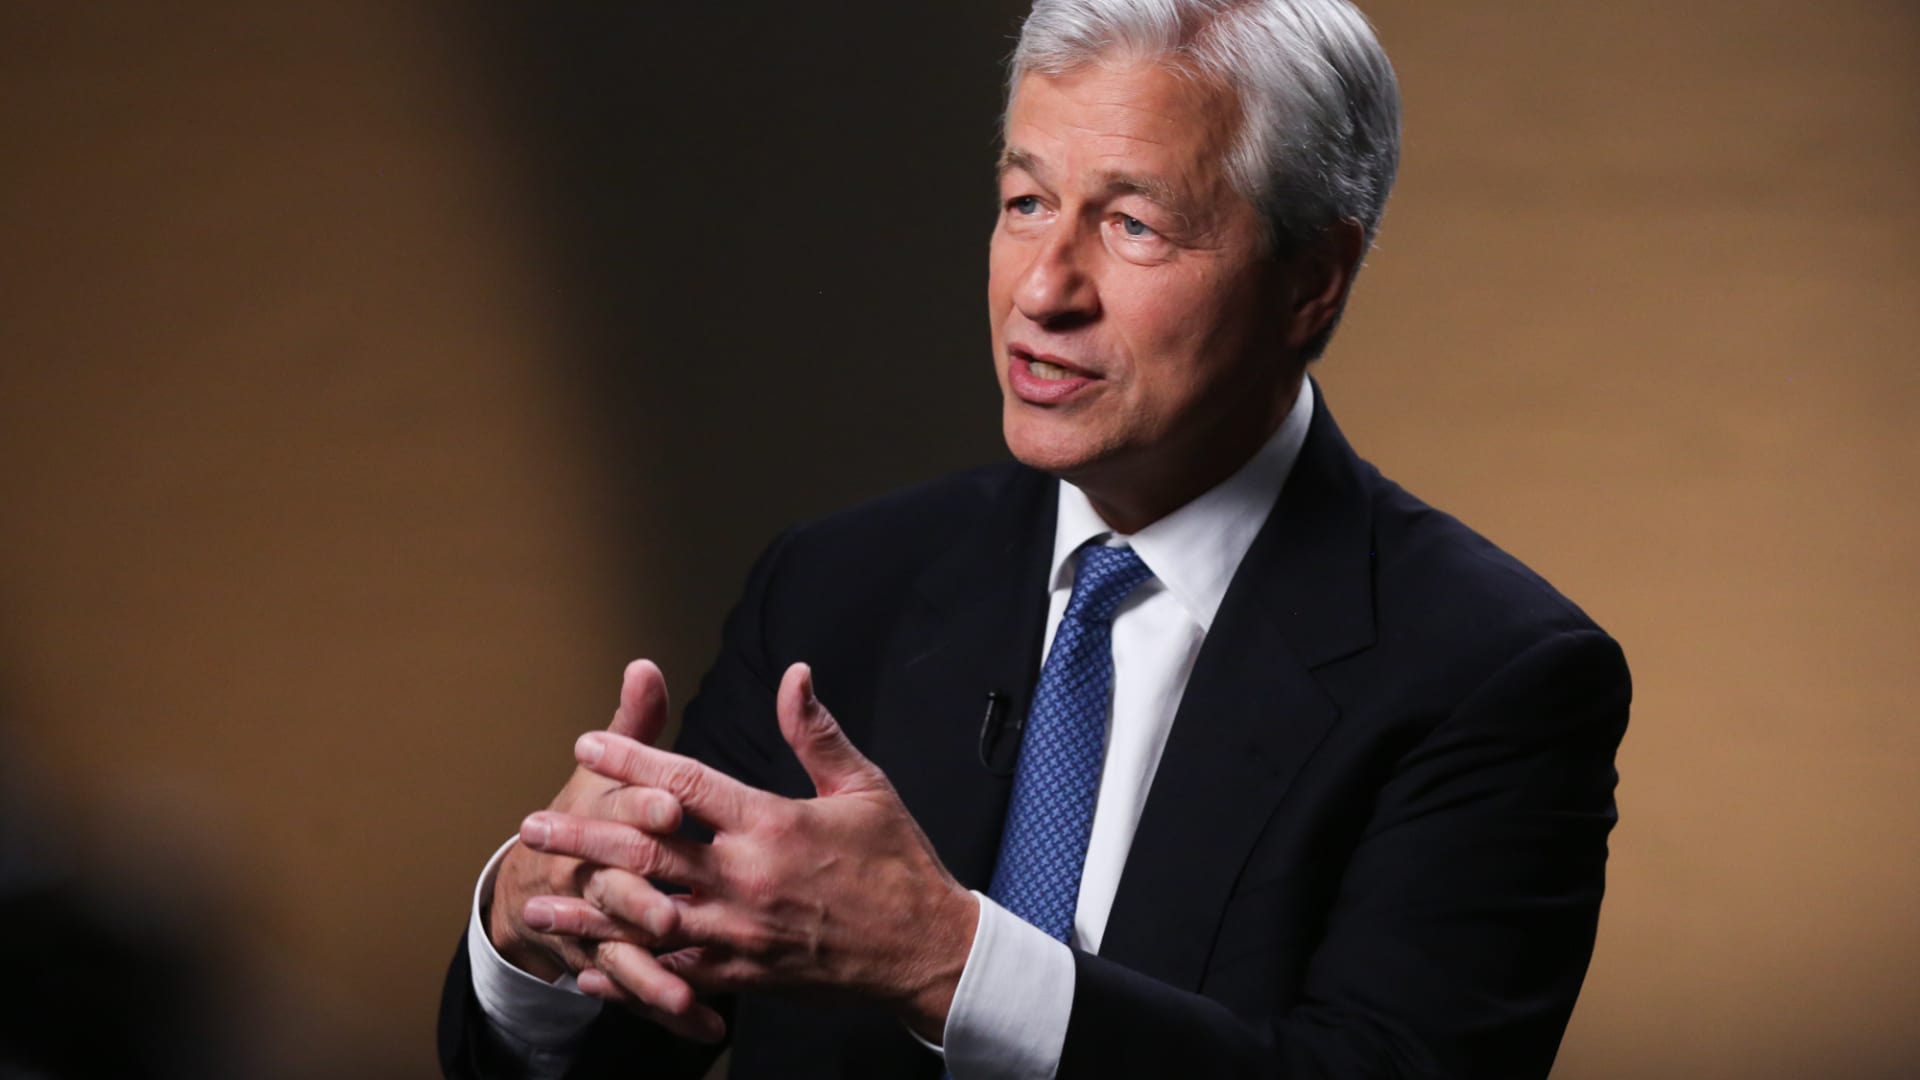 Jamie Dimon says inflation eroding consumer wealth may cause recession next year